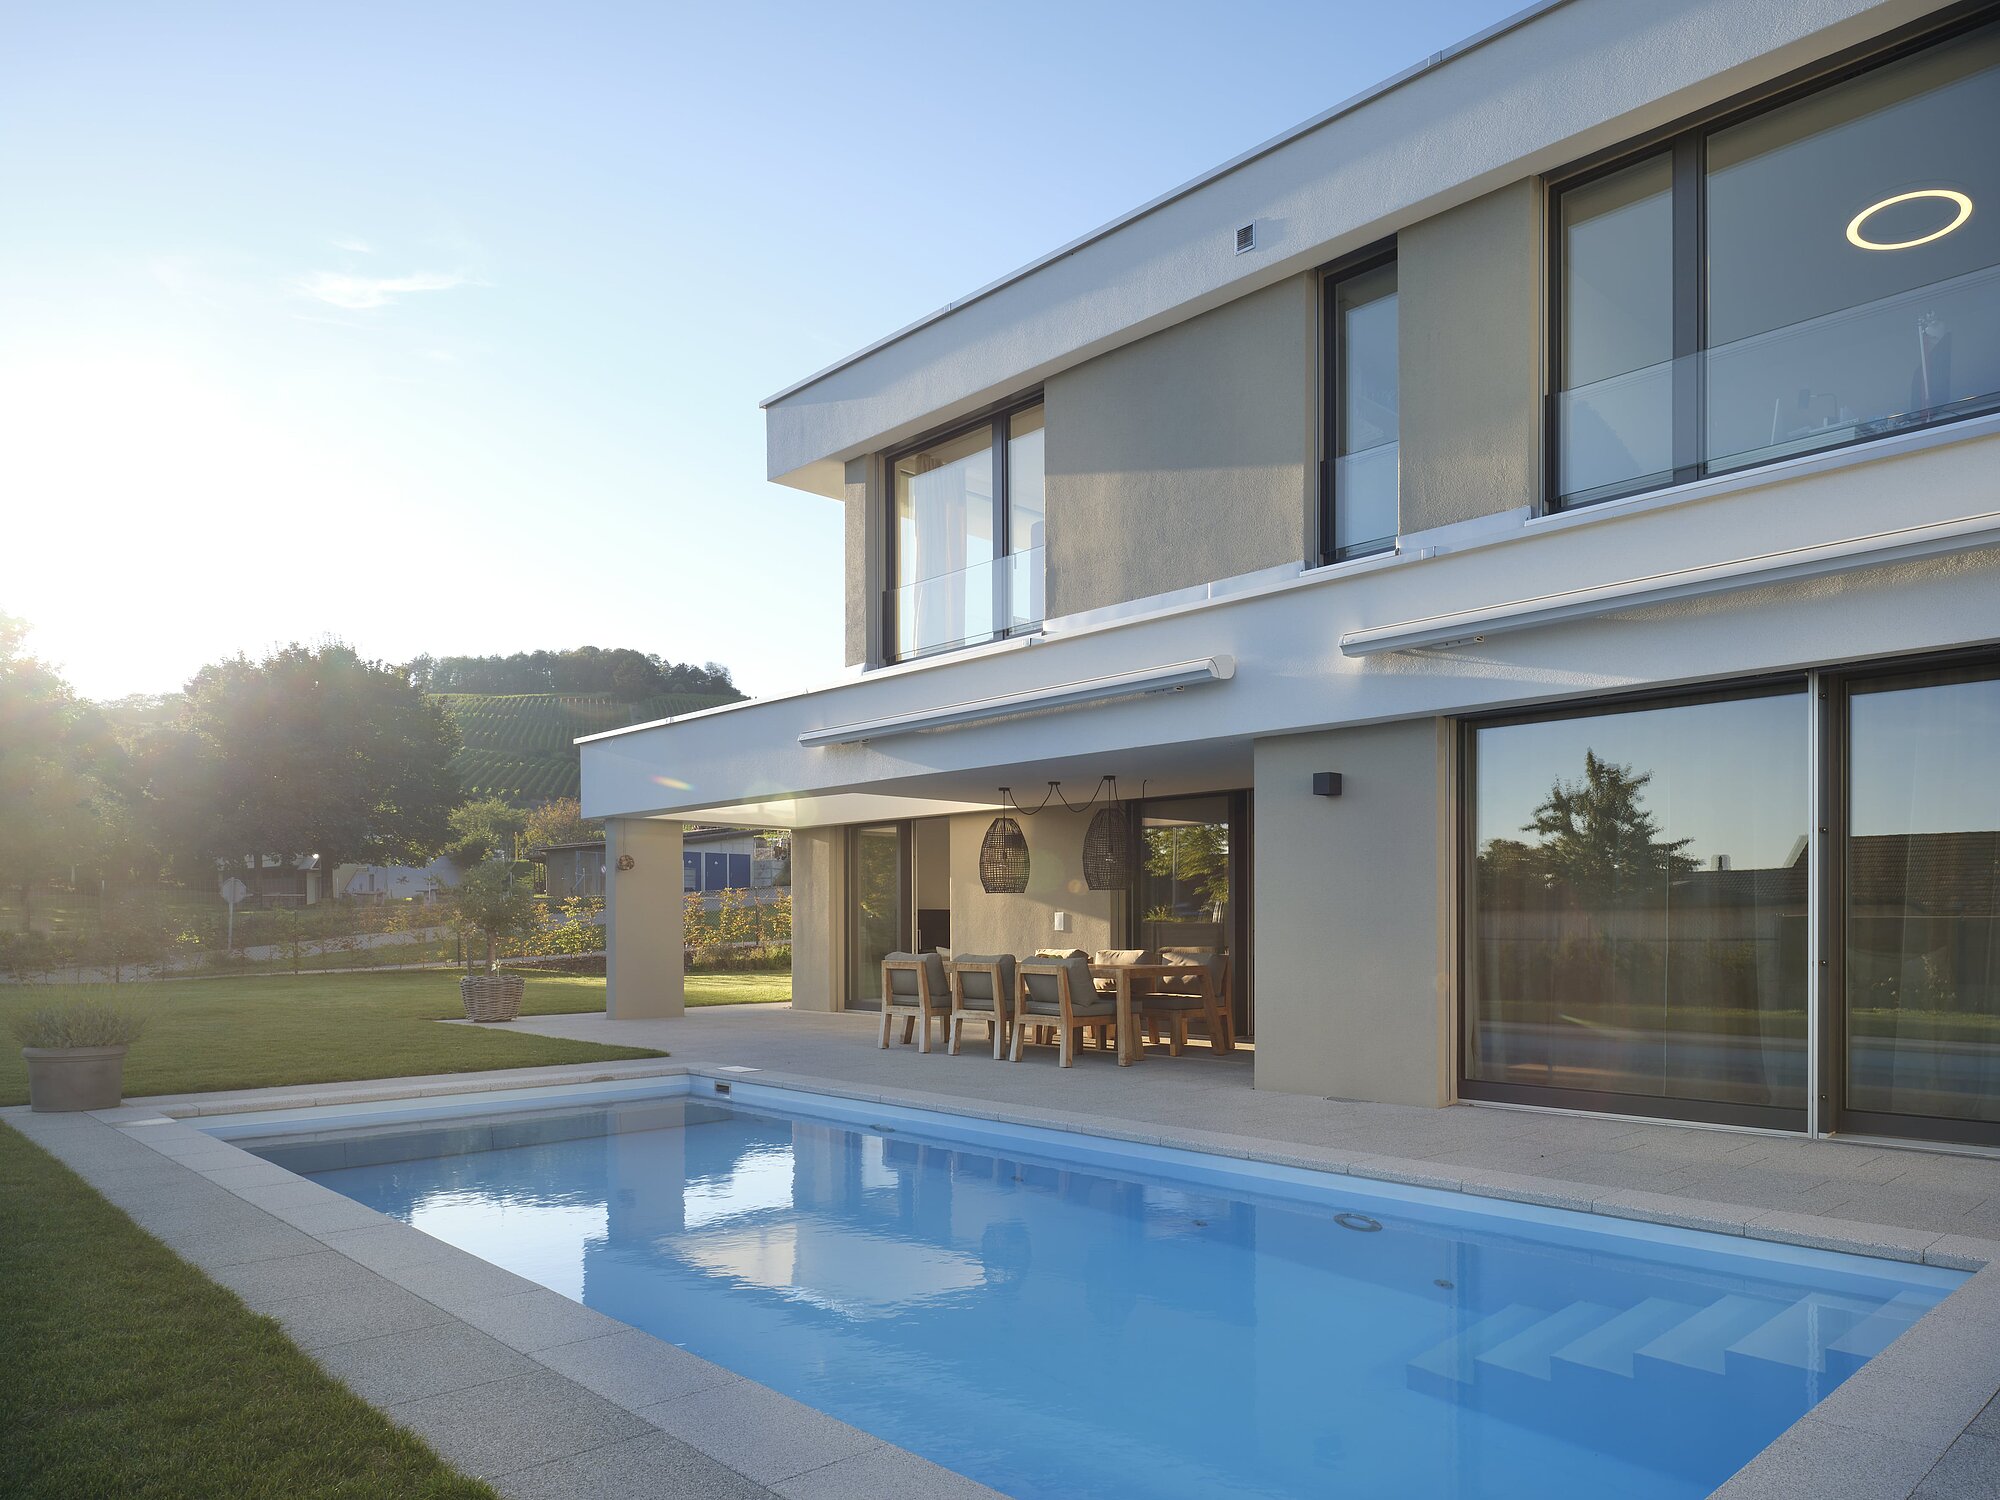 Exterior view of the VITIS VINIFERA detached house, pool